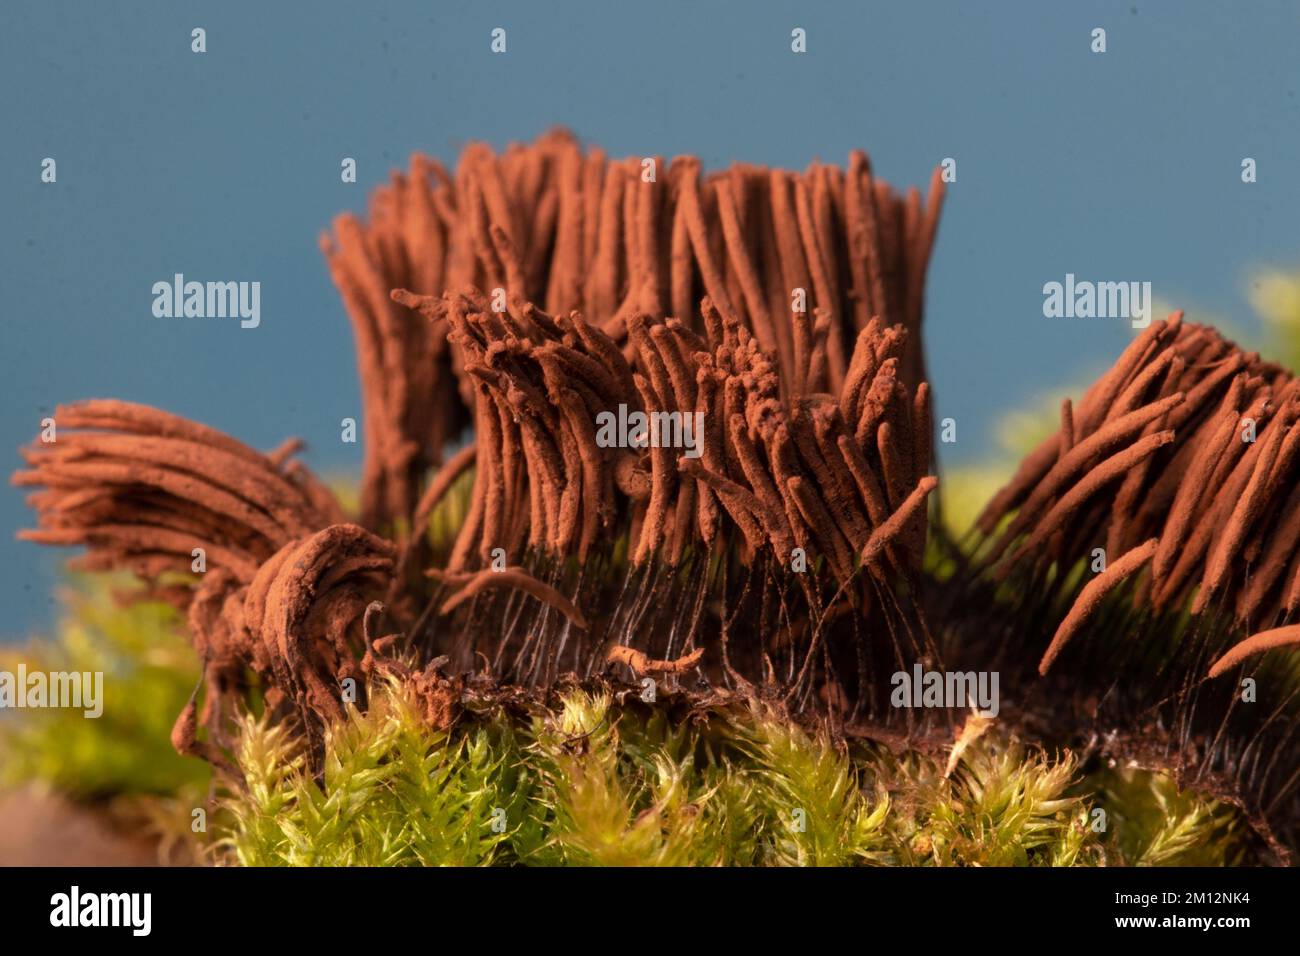 Tufted slime mould fruiting body with many light brown stalks in front of blue sky Stock Photo